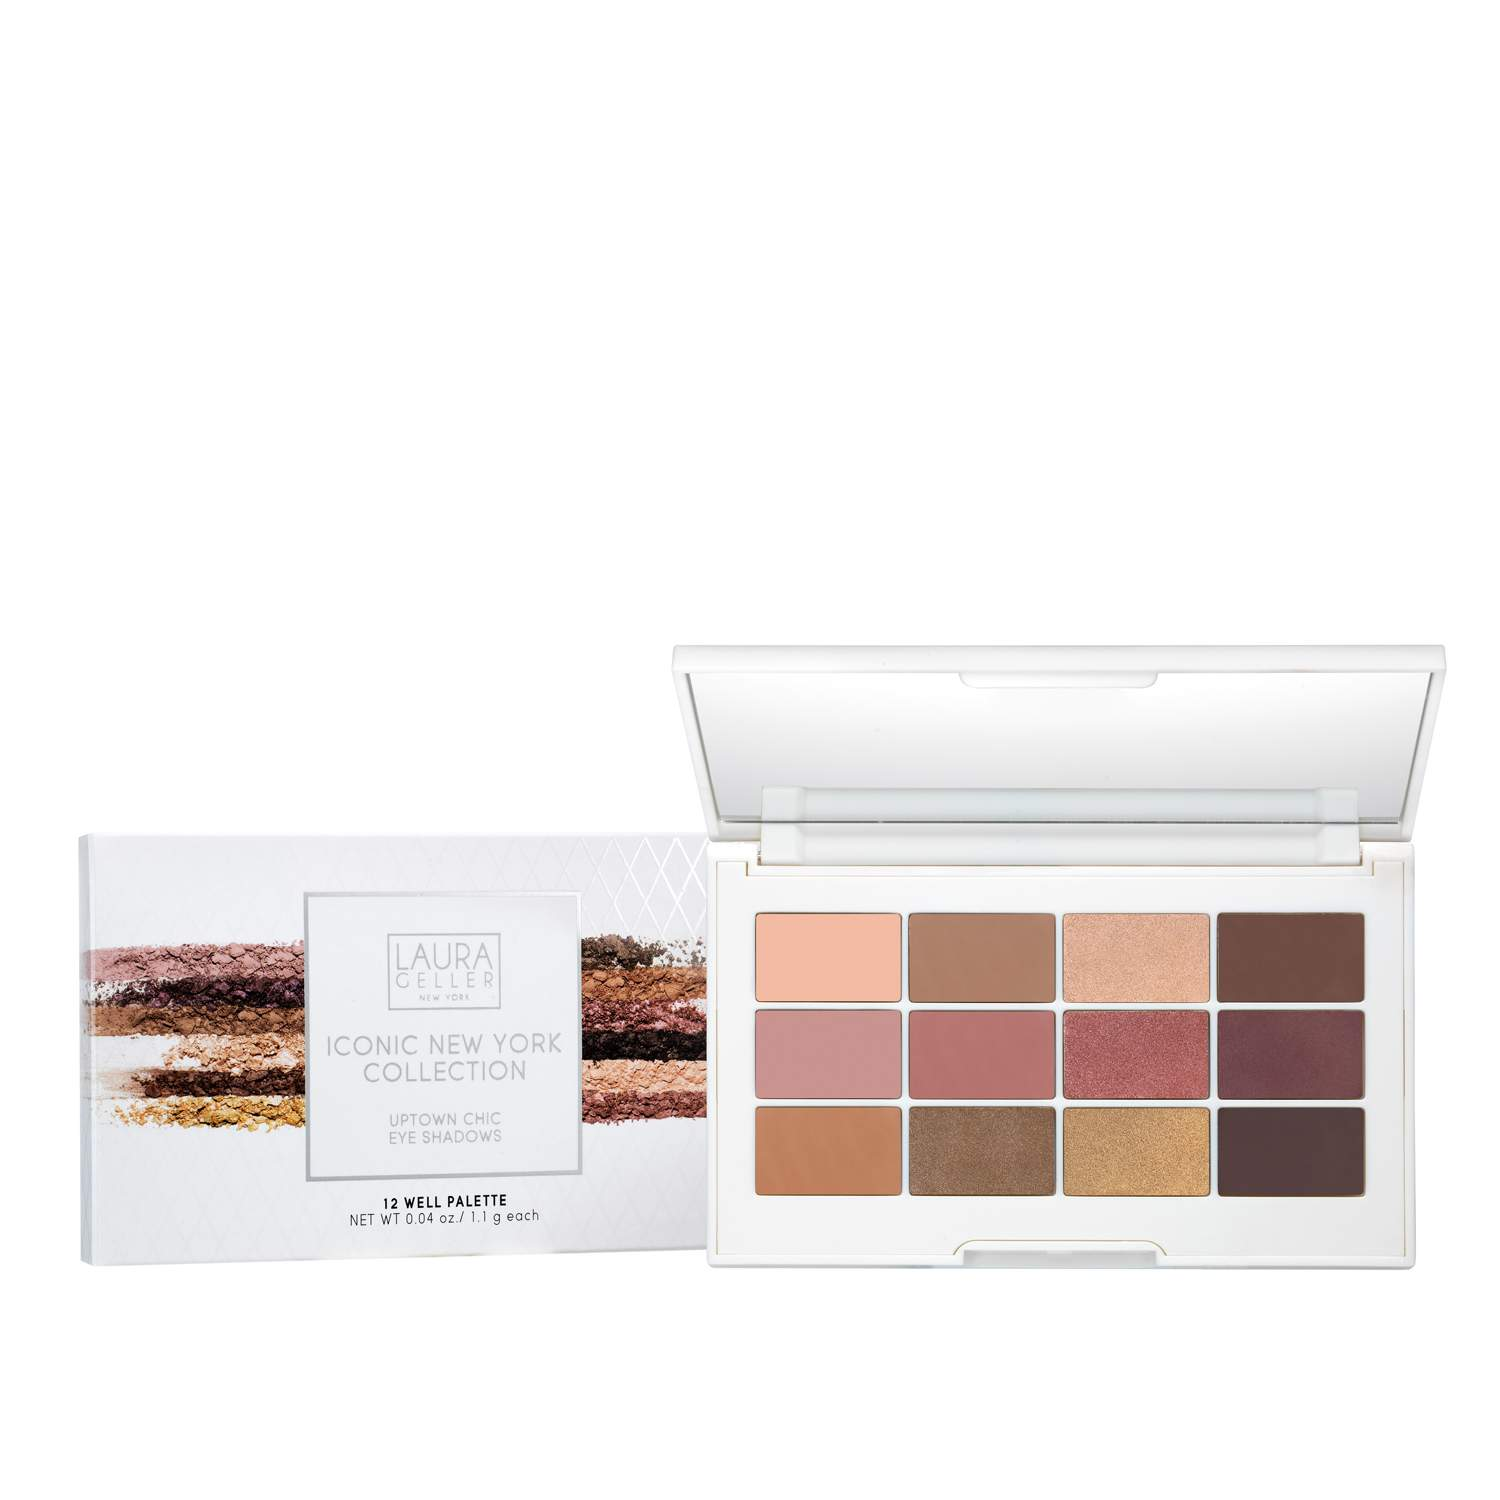 New York Iconic New York Collection Eye Shadow Palette  1